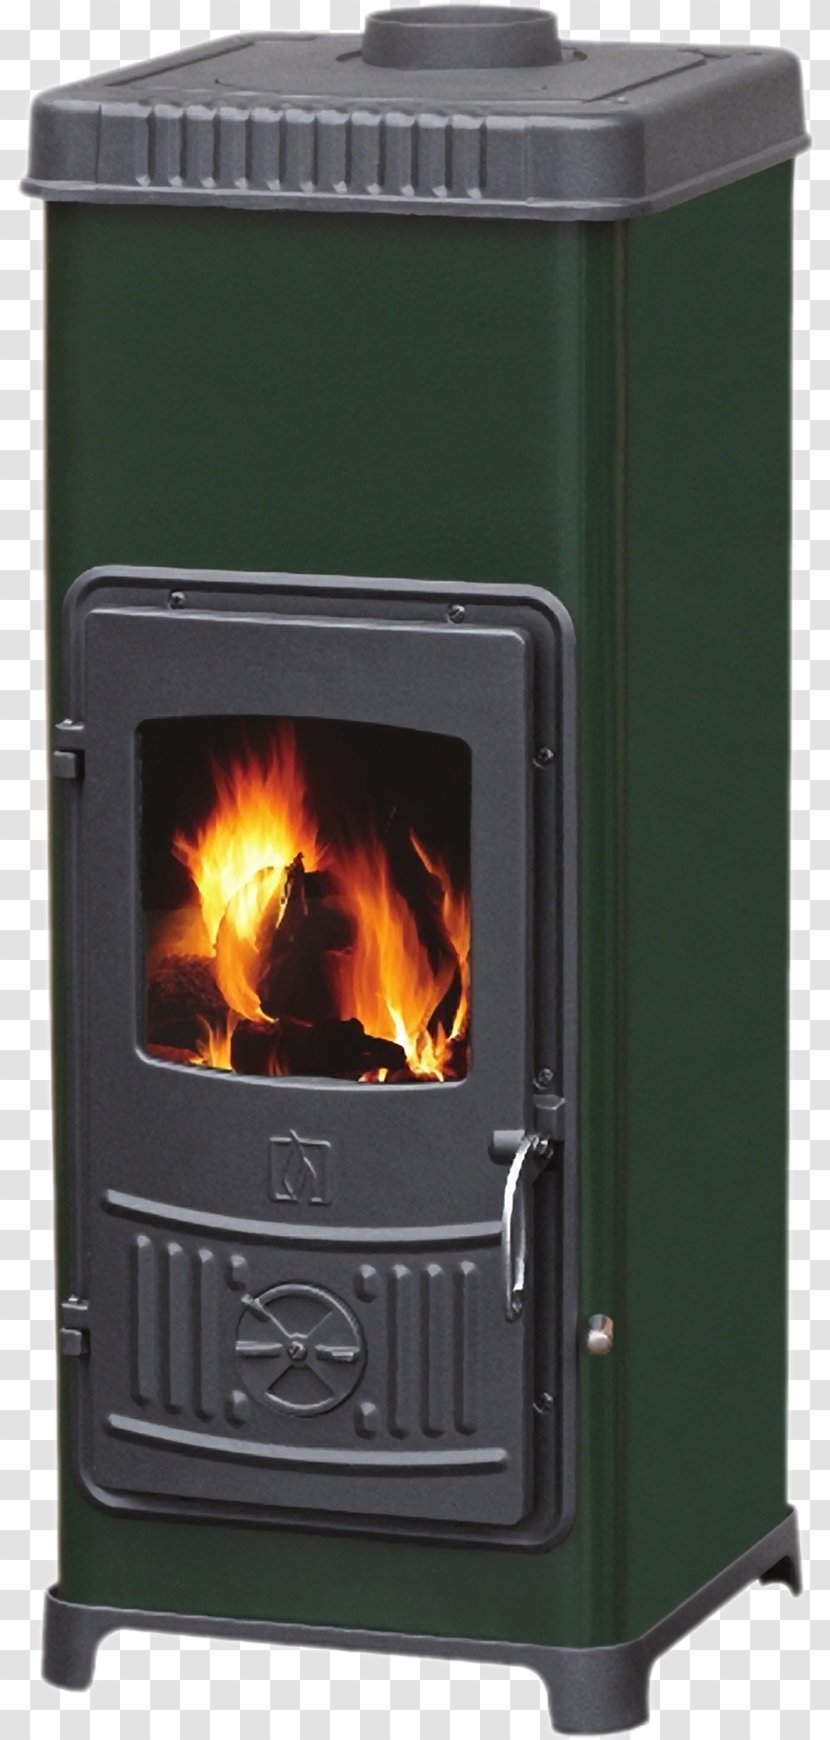 Flame Firebox Green Color Oven - Major Appliance - Stove Transparent PNG